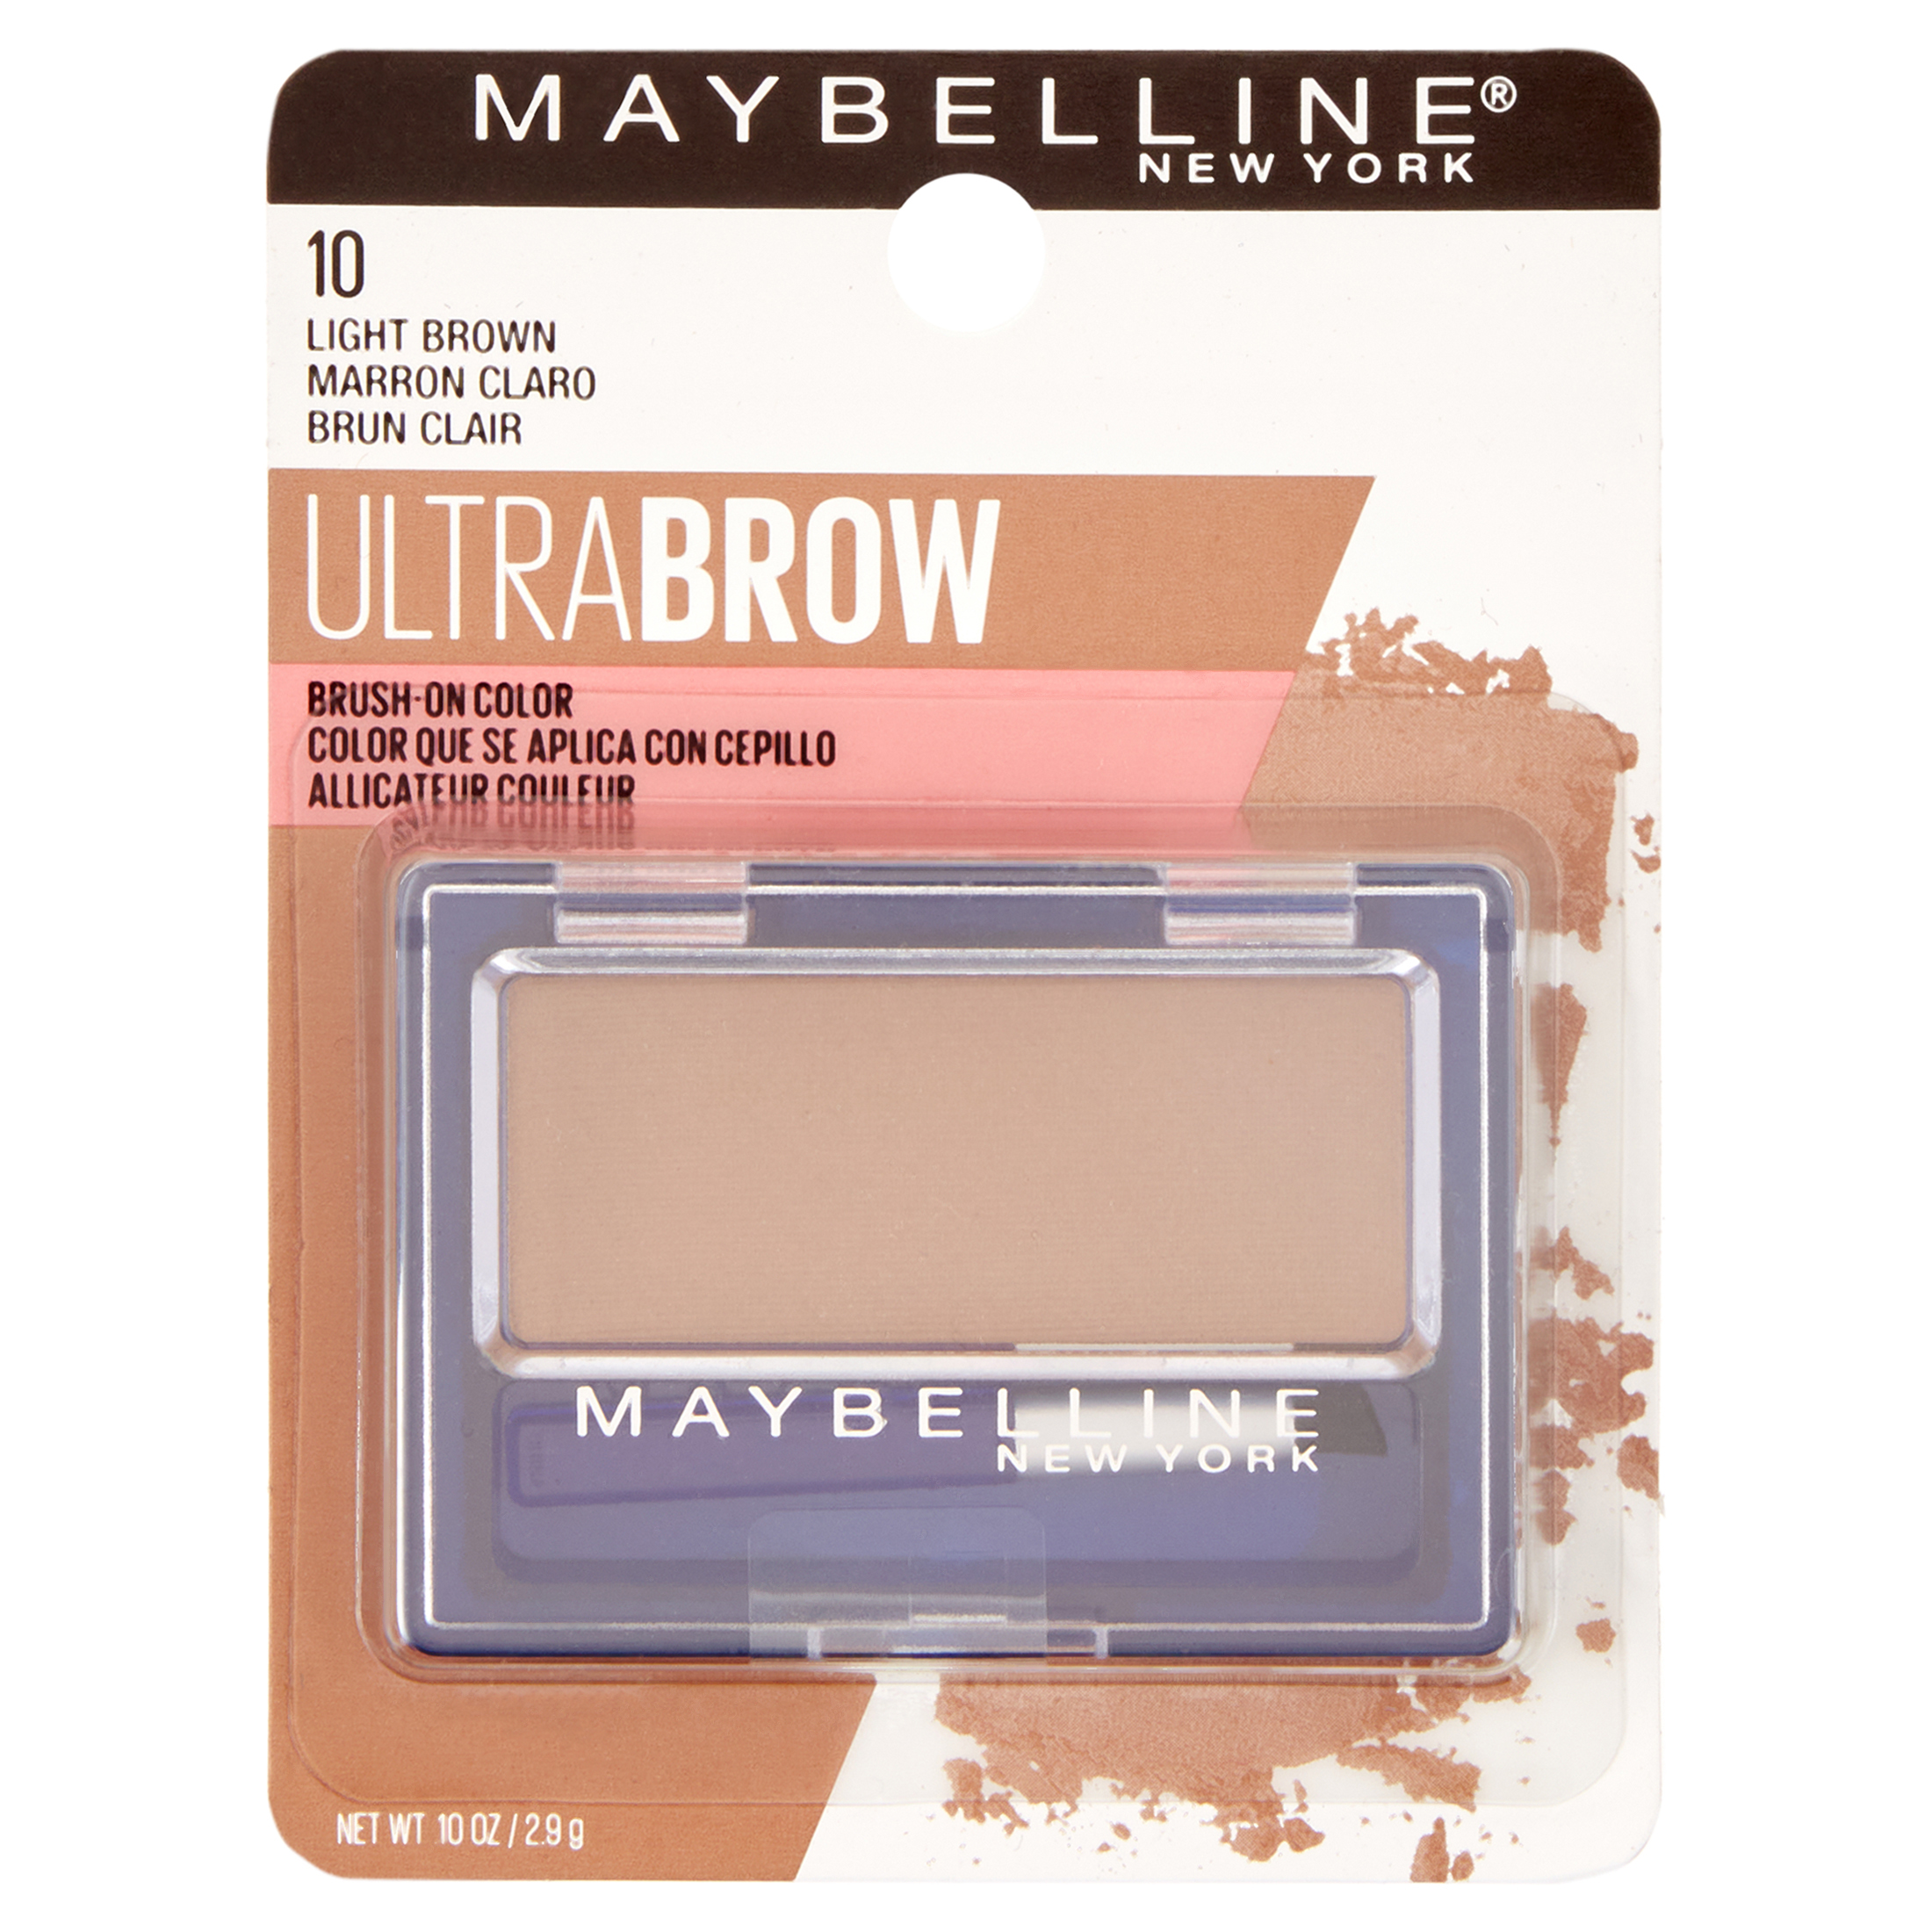 Maybelline New York Ultra Brow Brush On Color, Light Brown - image 1 of 7